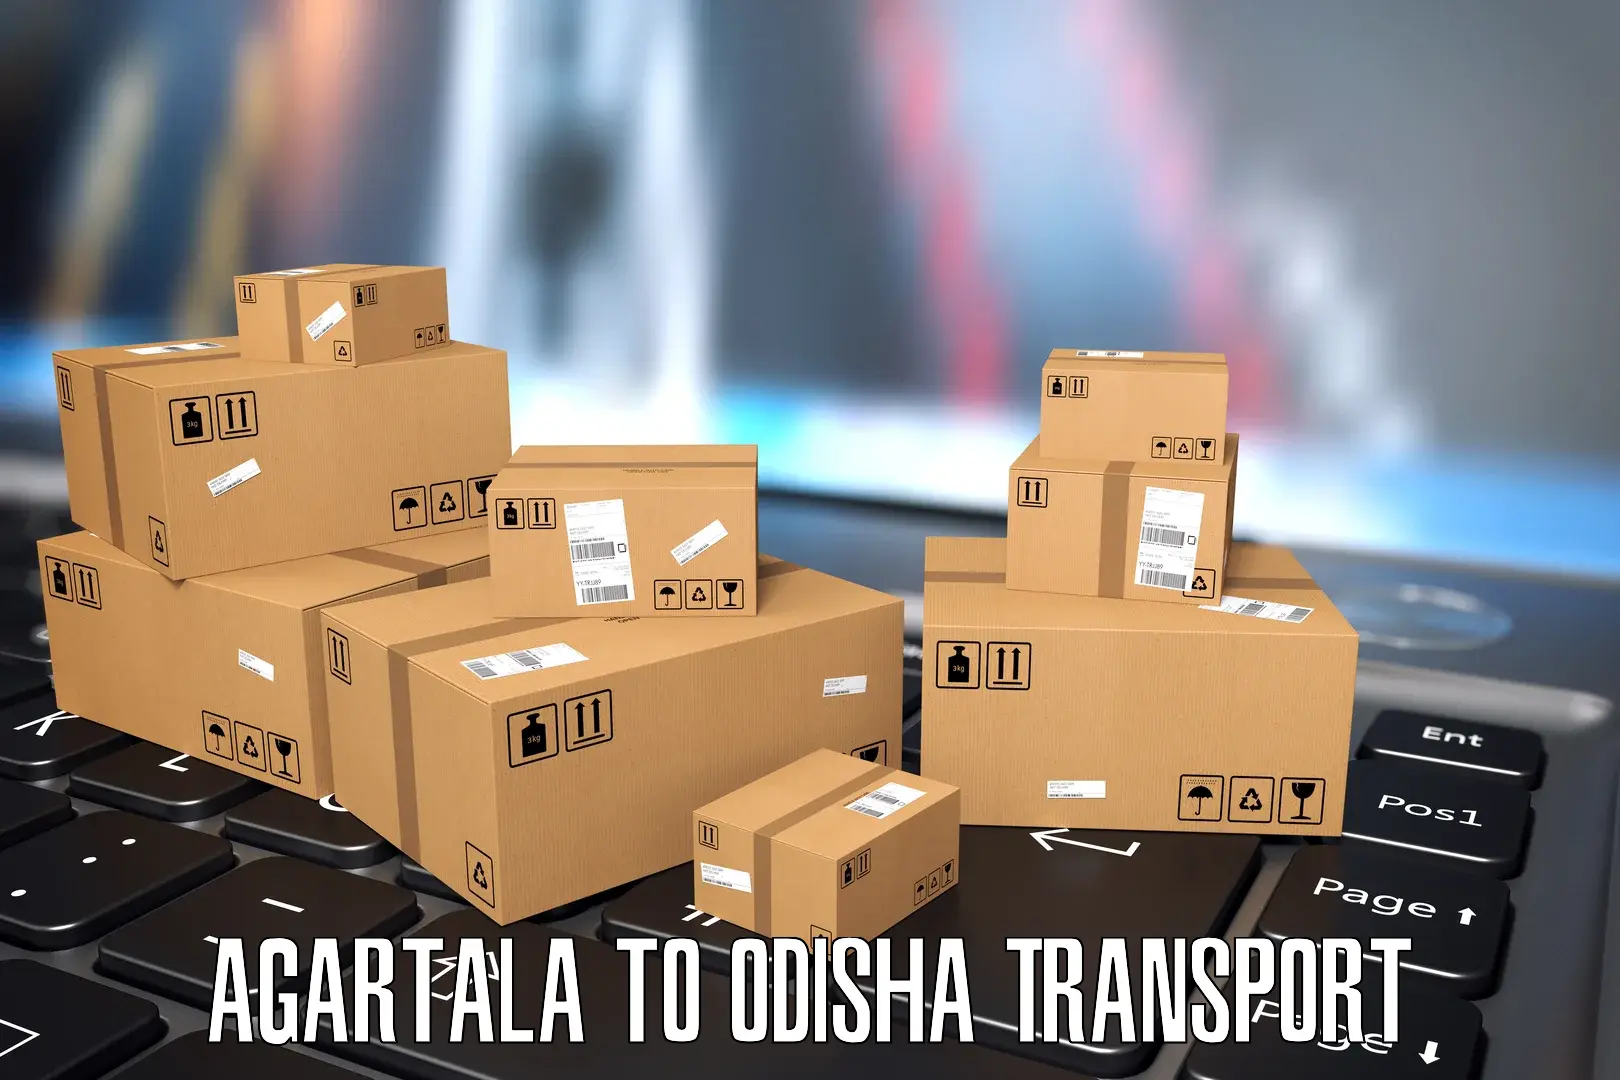 Container transport service Agartala to Dhamanagar